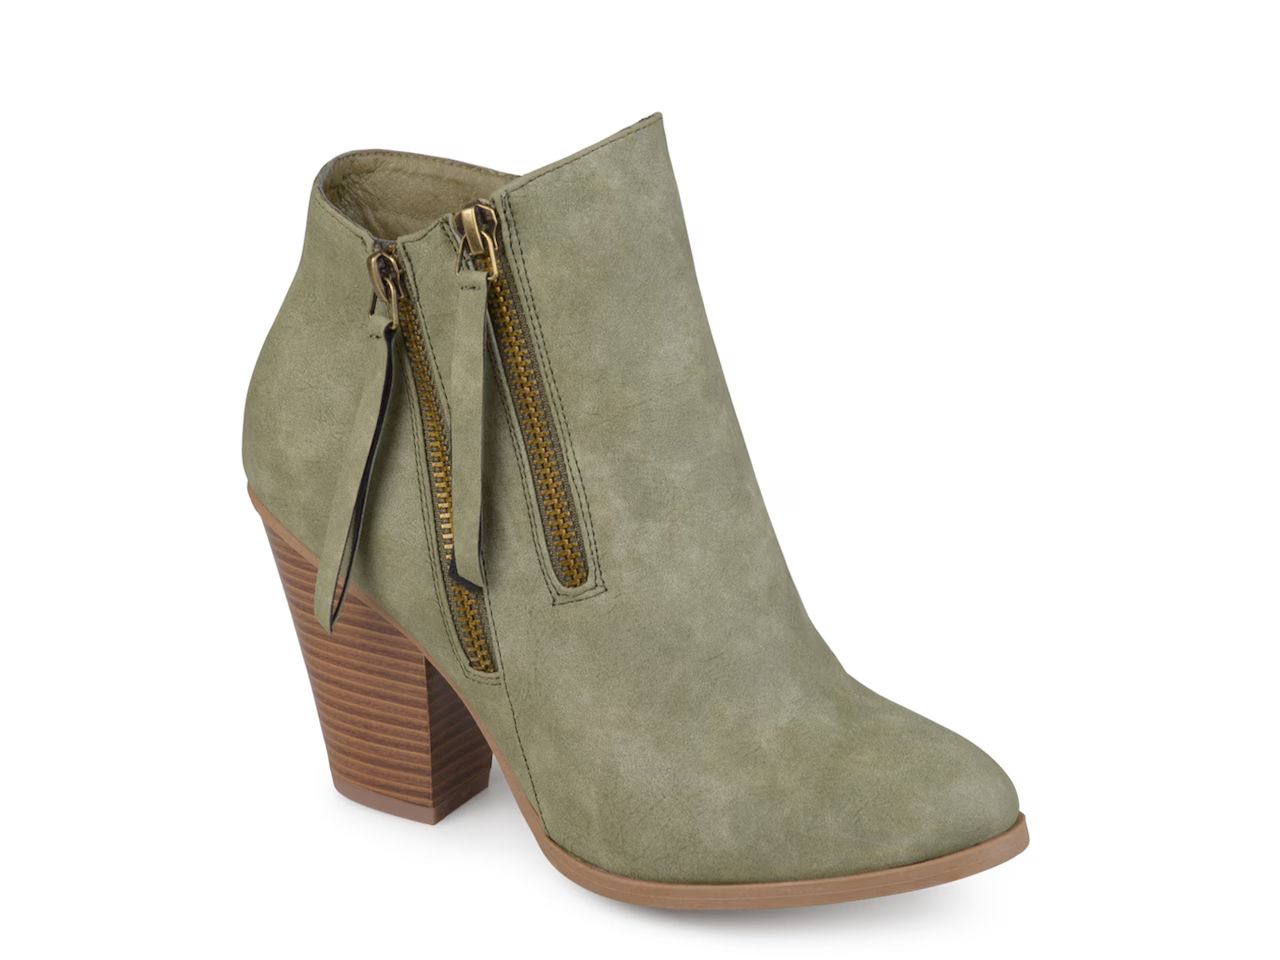 Journee Collection Vally Bootie | DSW